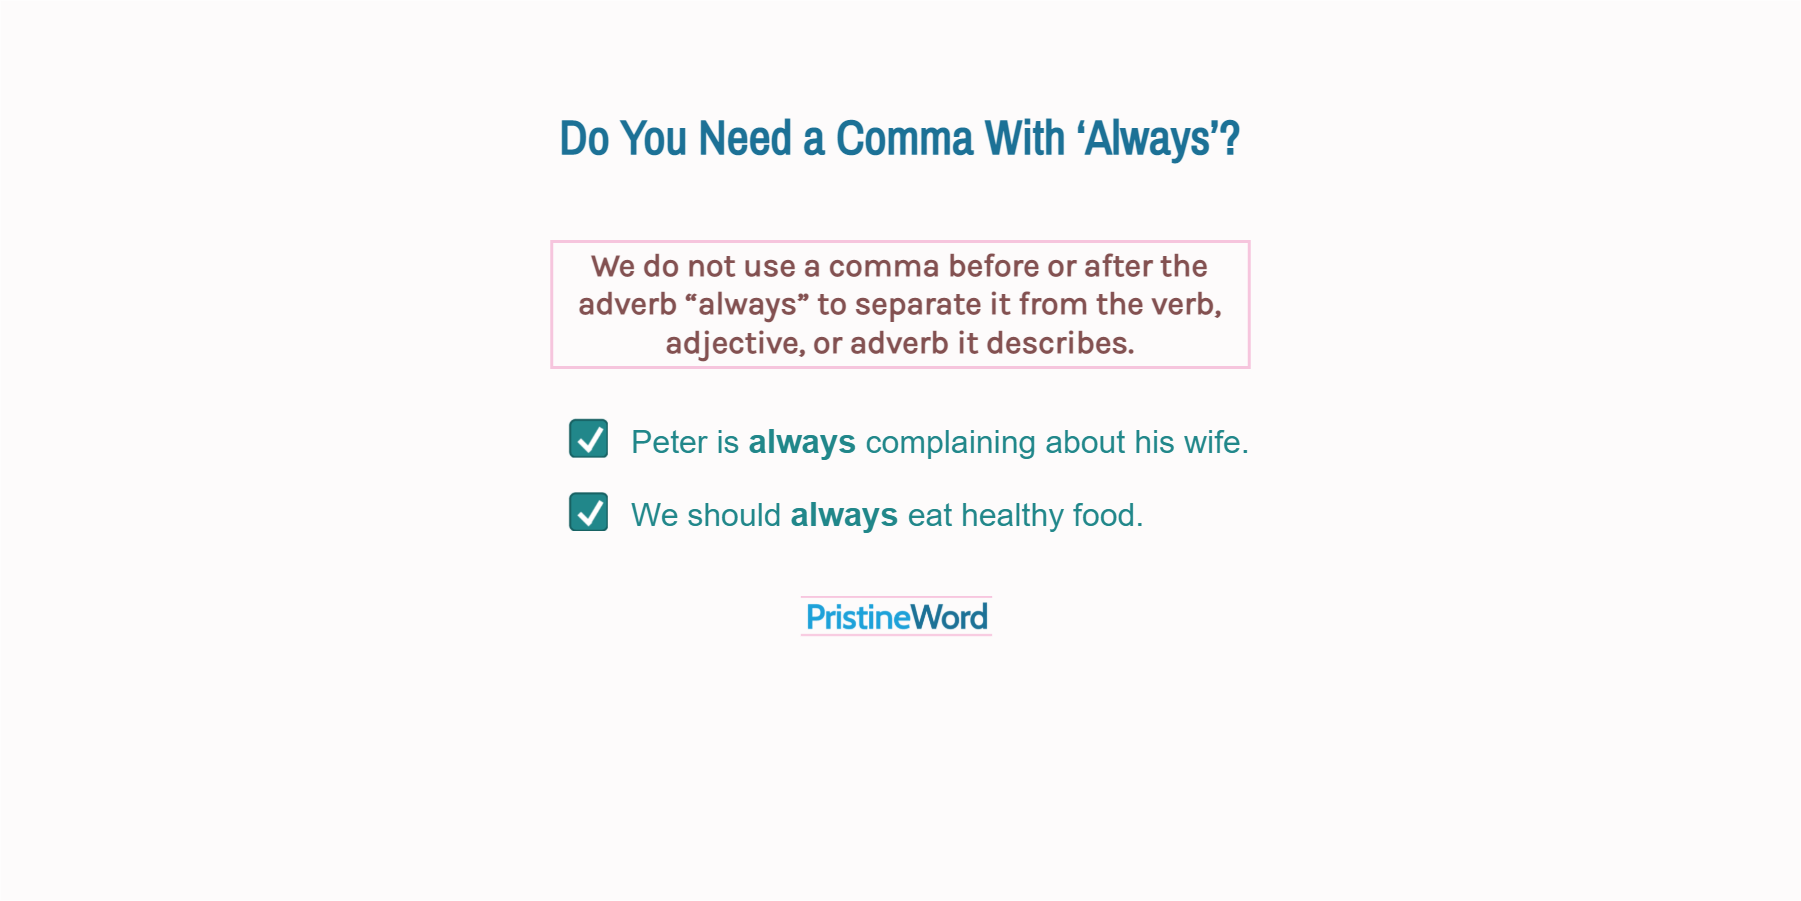 Can You Use a Comma With 'Always'?